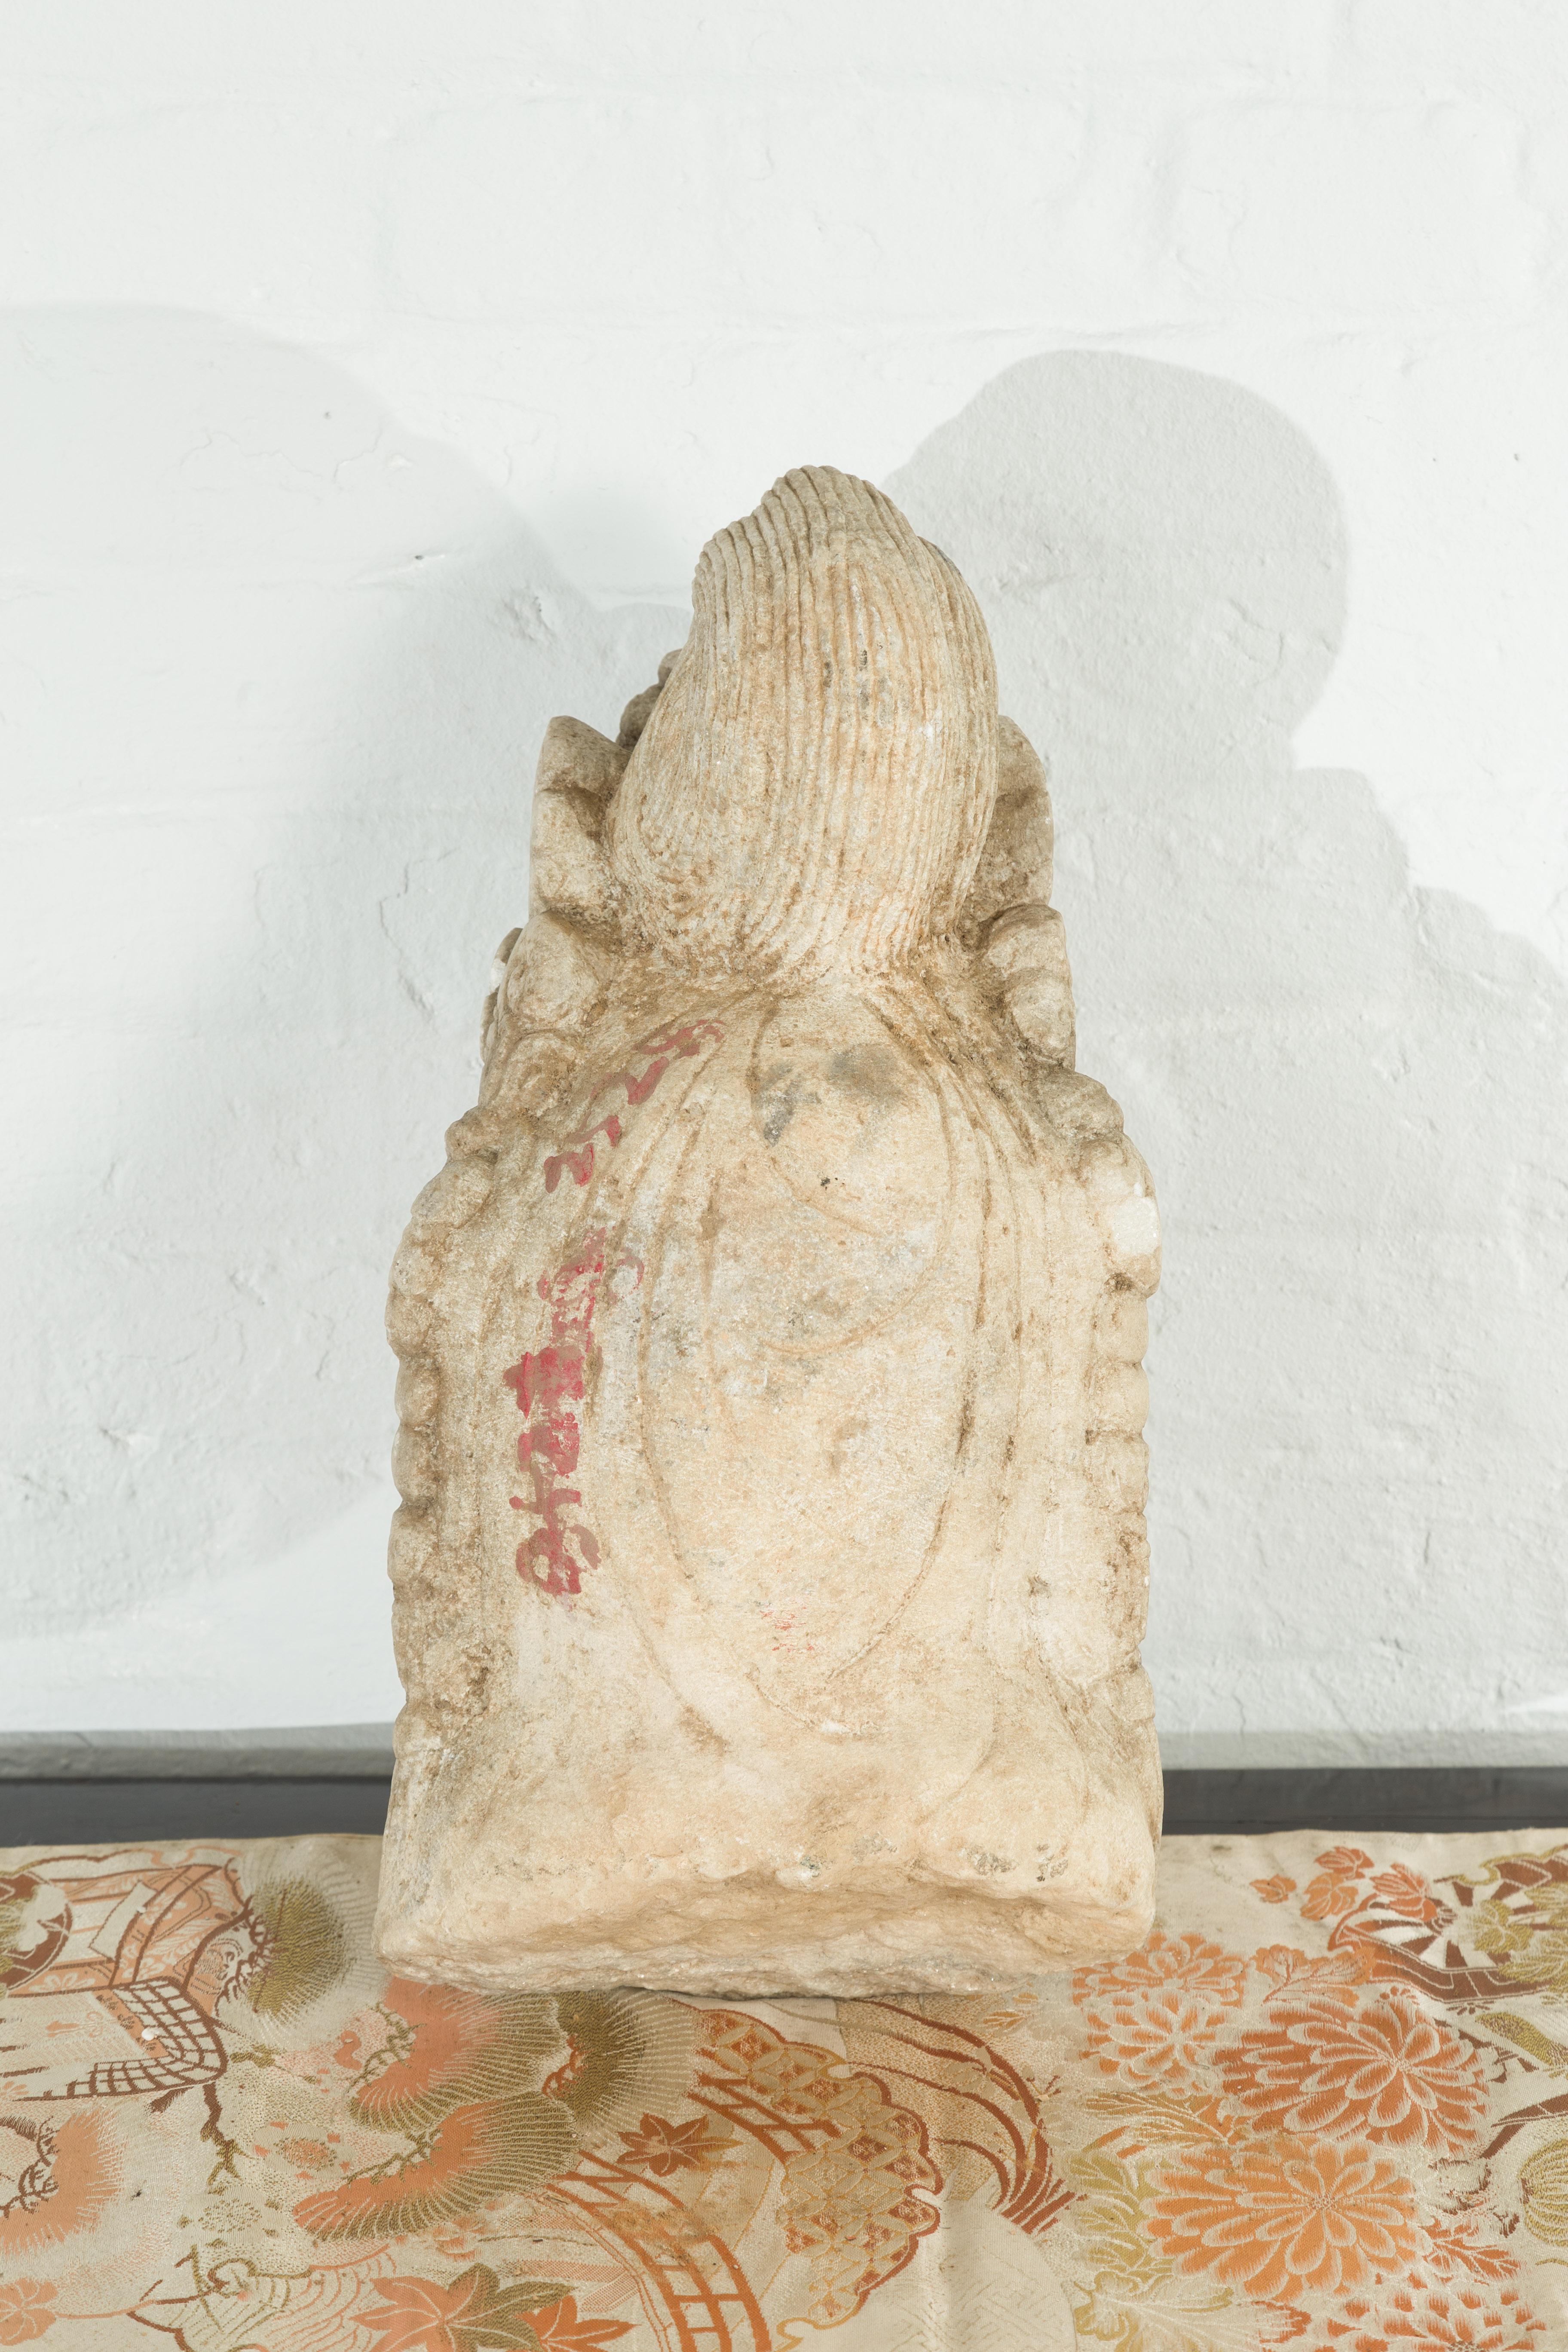 Vintage Chinese Carved Stone Bust of Guanyin the Bodhisattva of Compassion For Sale 5